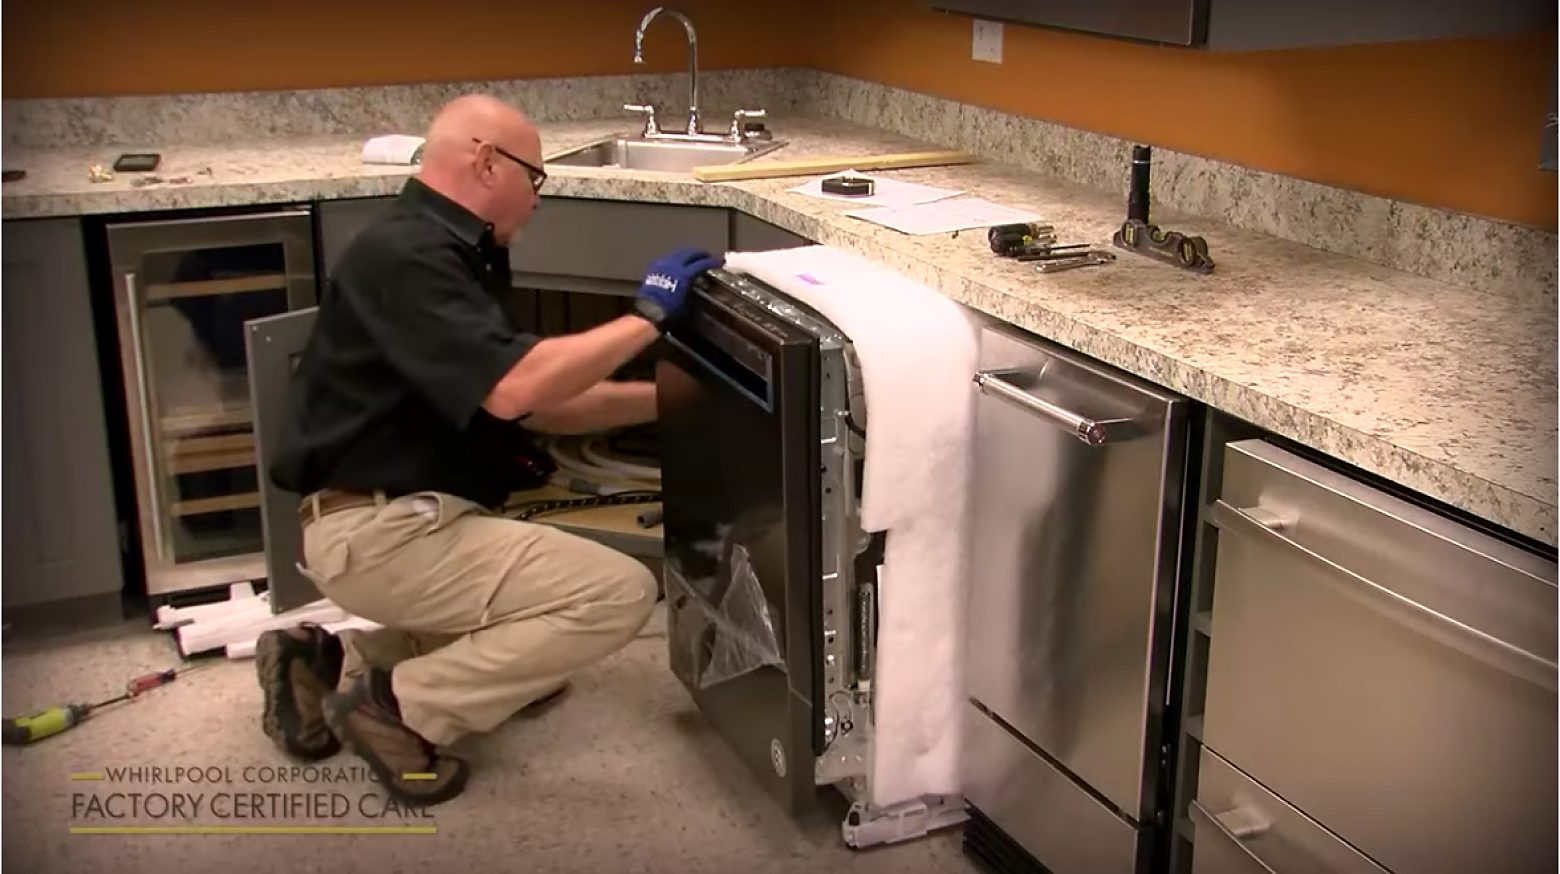 Person installing a new dishwasher